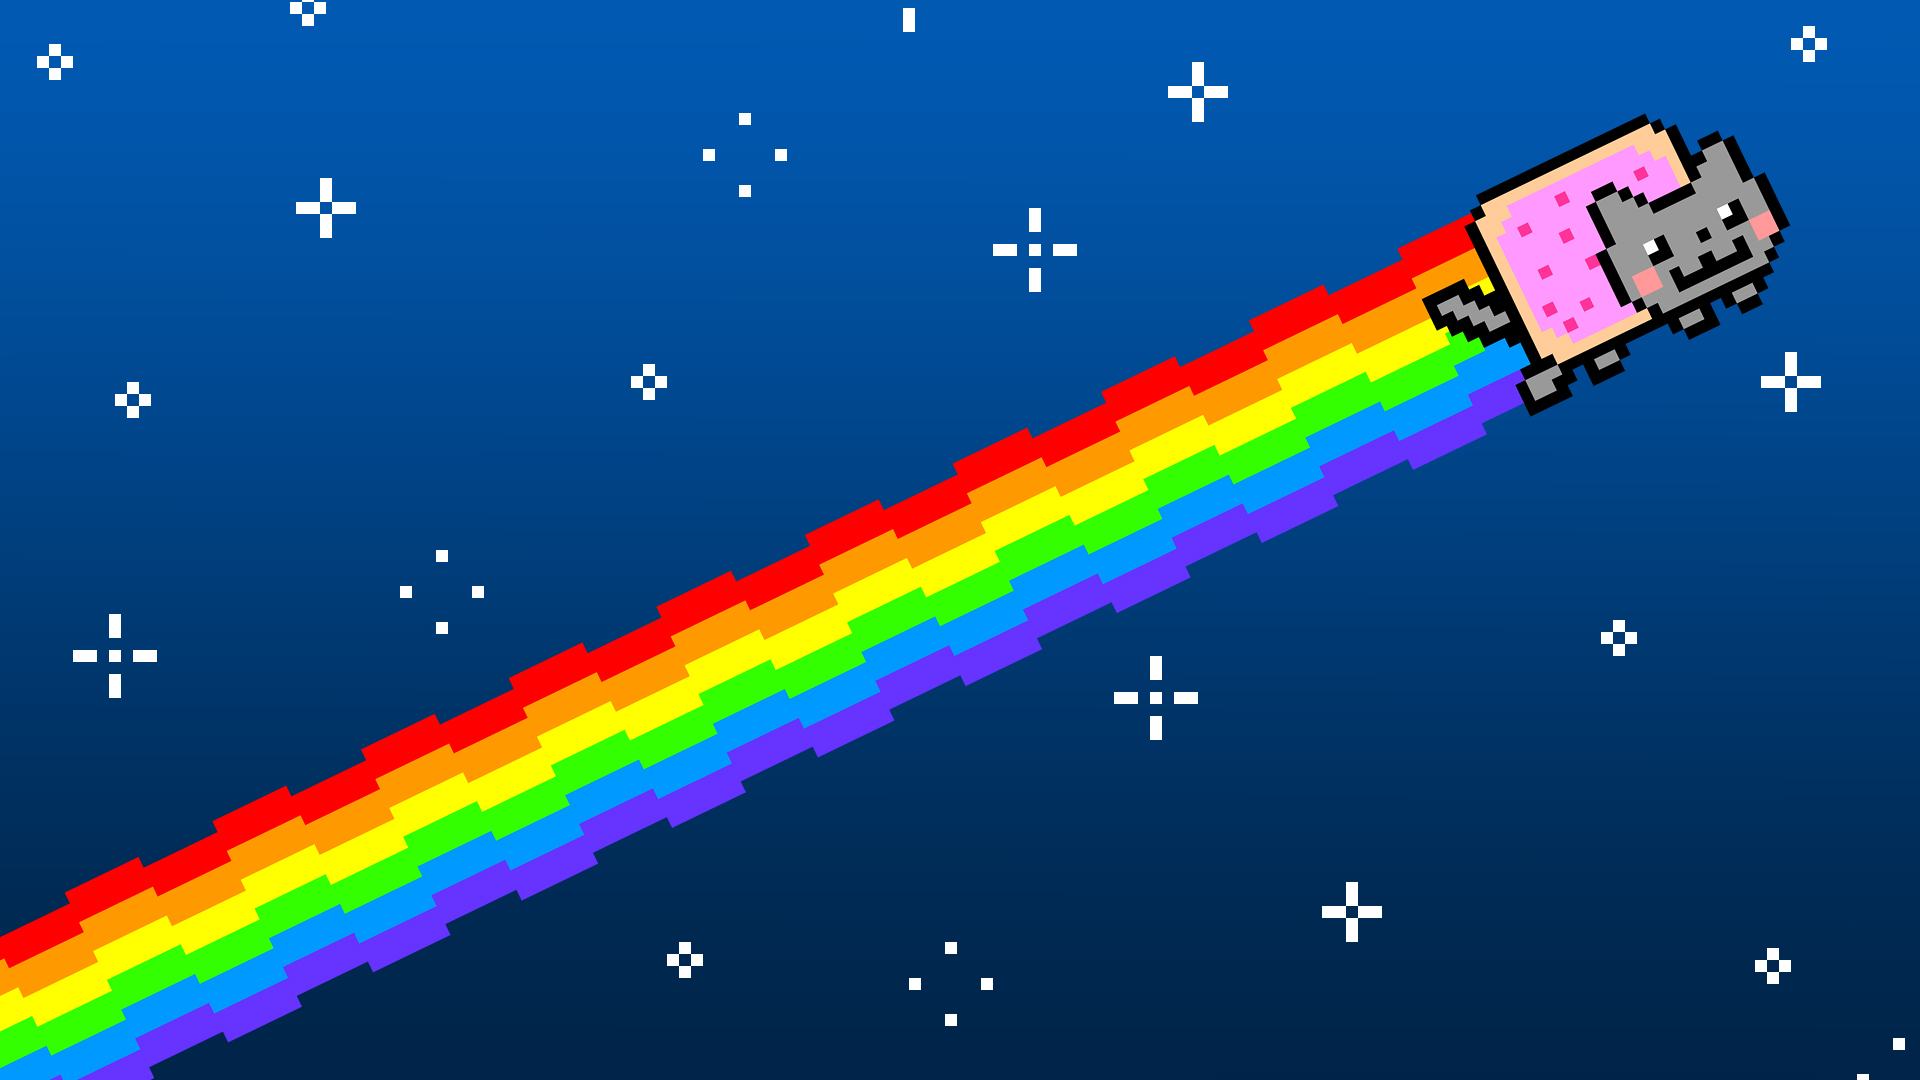 Nyan Cat Wallpapers Free Download | HD Wallpapers, Backgrounds, Images, Art Photos.1920 x 1080